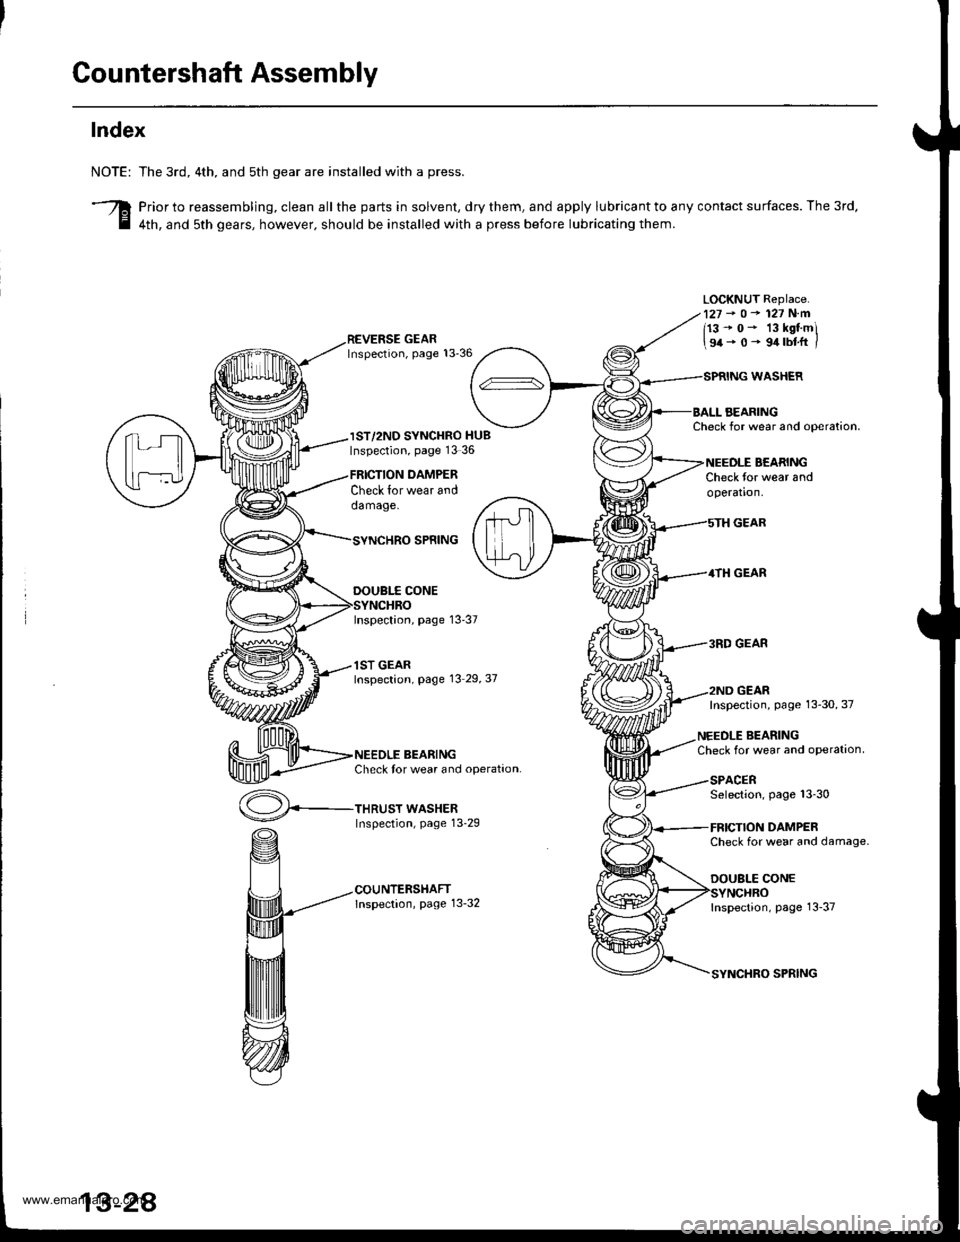 HONDA CR-V 1998 RD1-RD3 / 1.G Workshop Manual 
Countershaft Assembly
Index
NOTE:
3
The 3rd, 4th. and sth gear are installed with a press.
Prior to reassembling, clean all the parts in solvent, dry them, and apply lubricant to any contact surfaces